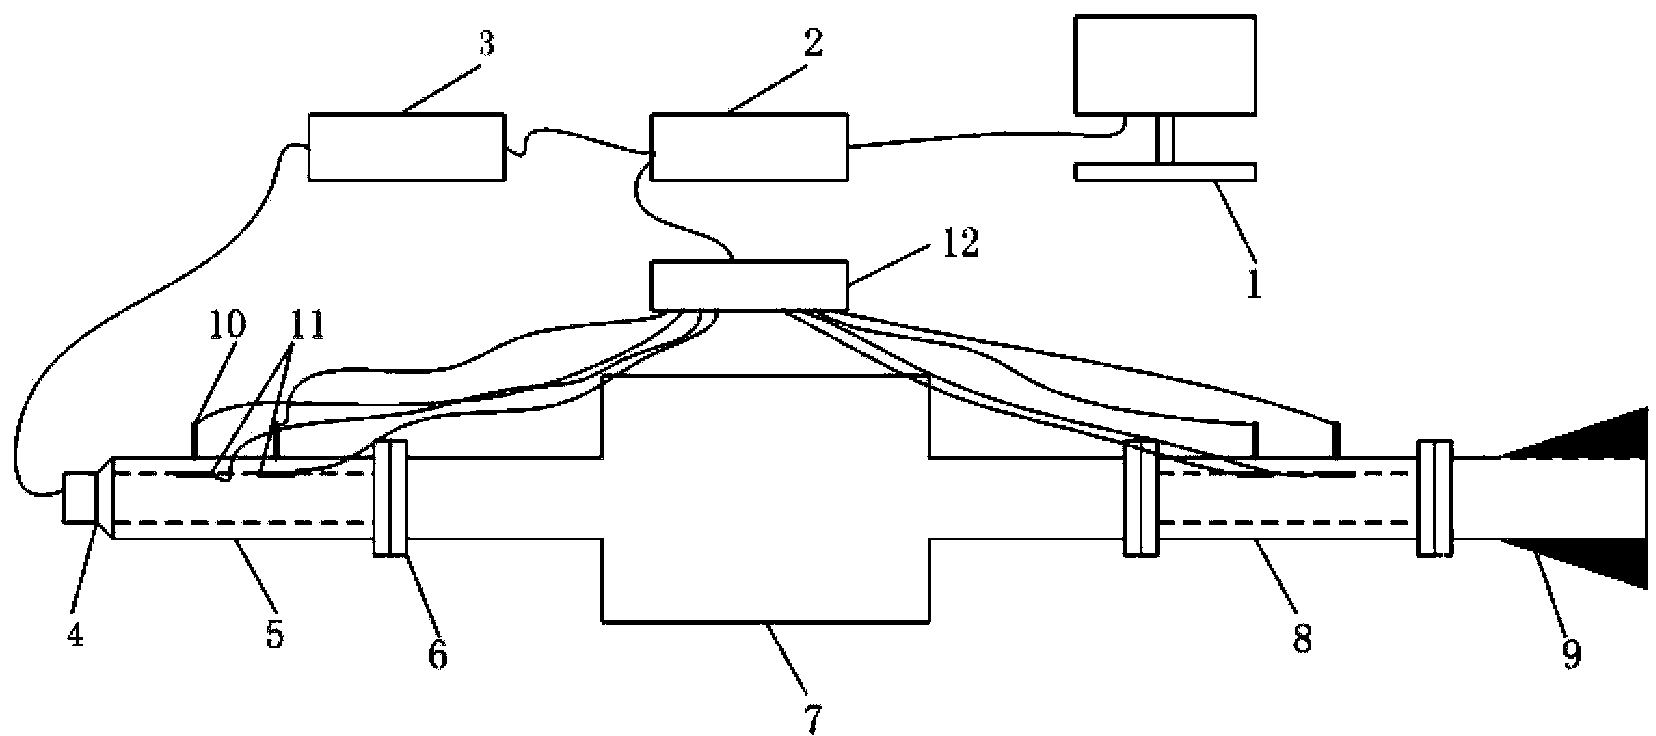 Experimental measurement method for medium-high frequency acoustic performance of large-pipe-diameter silencer